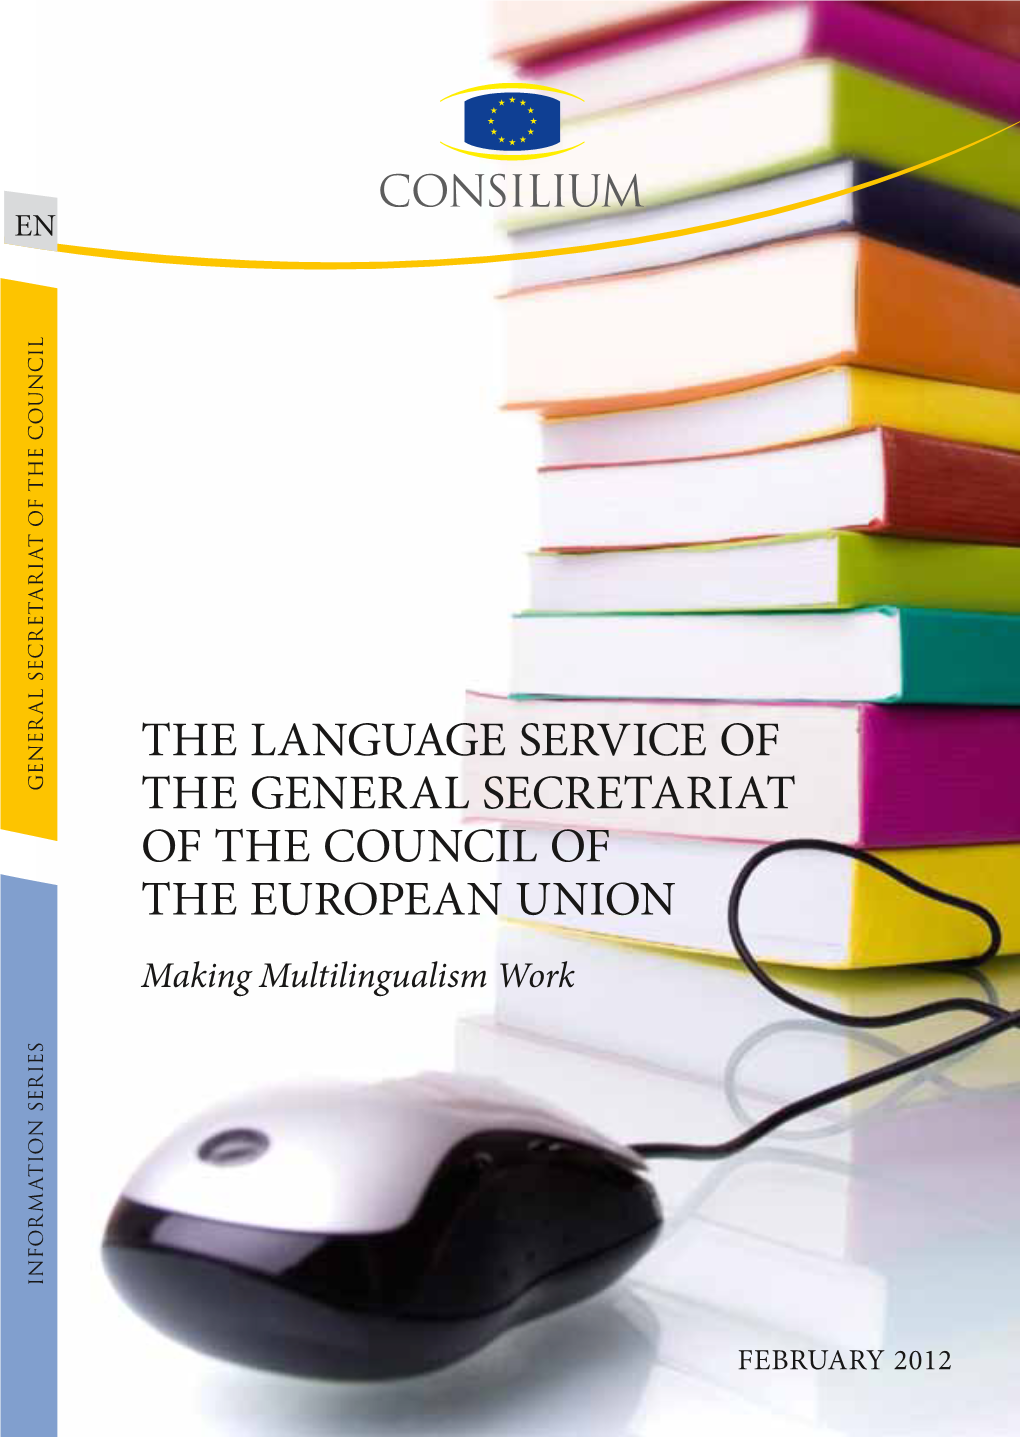 The Language Service of the General Secretariat of The